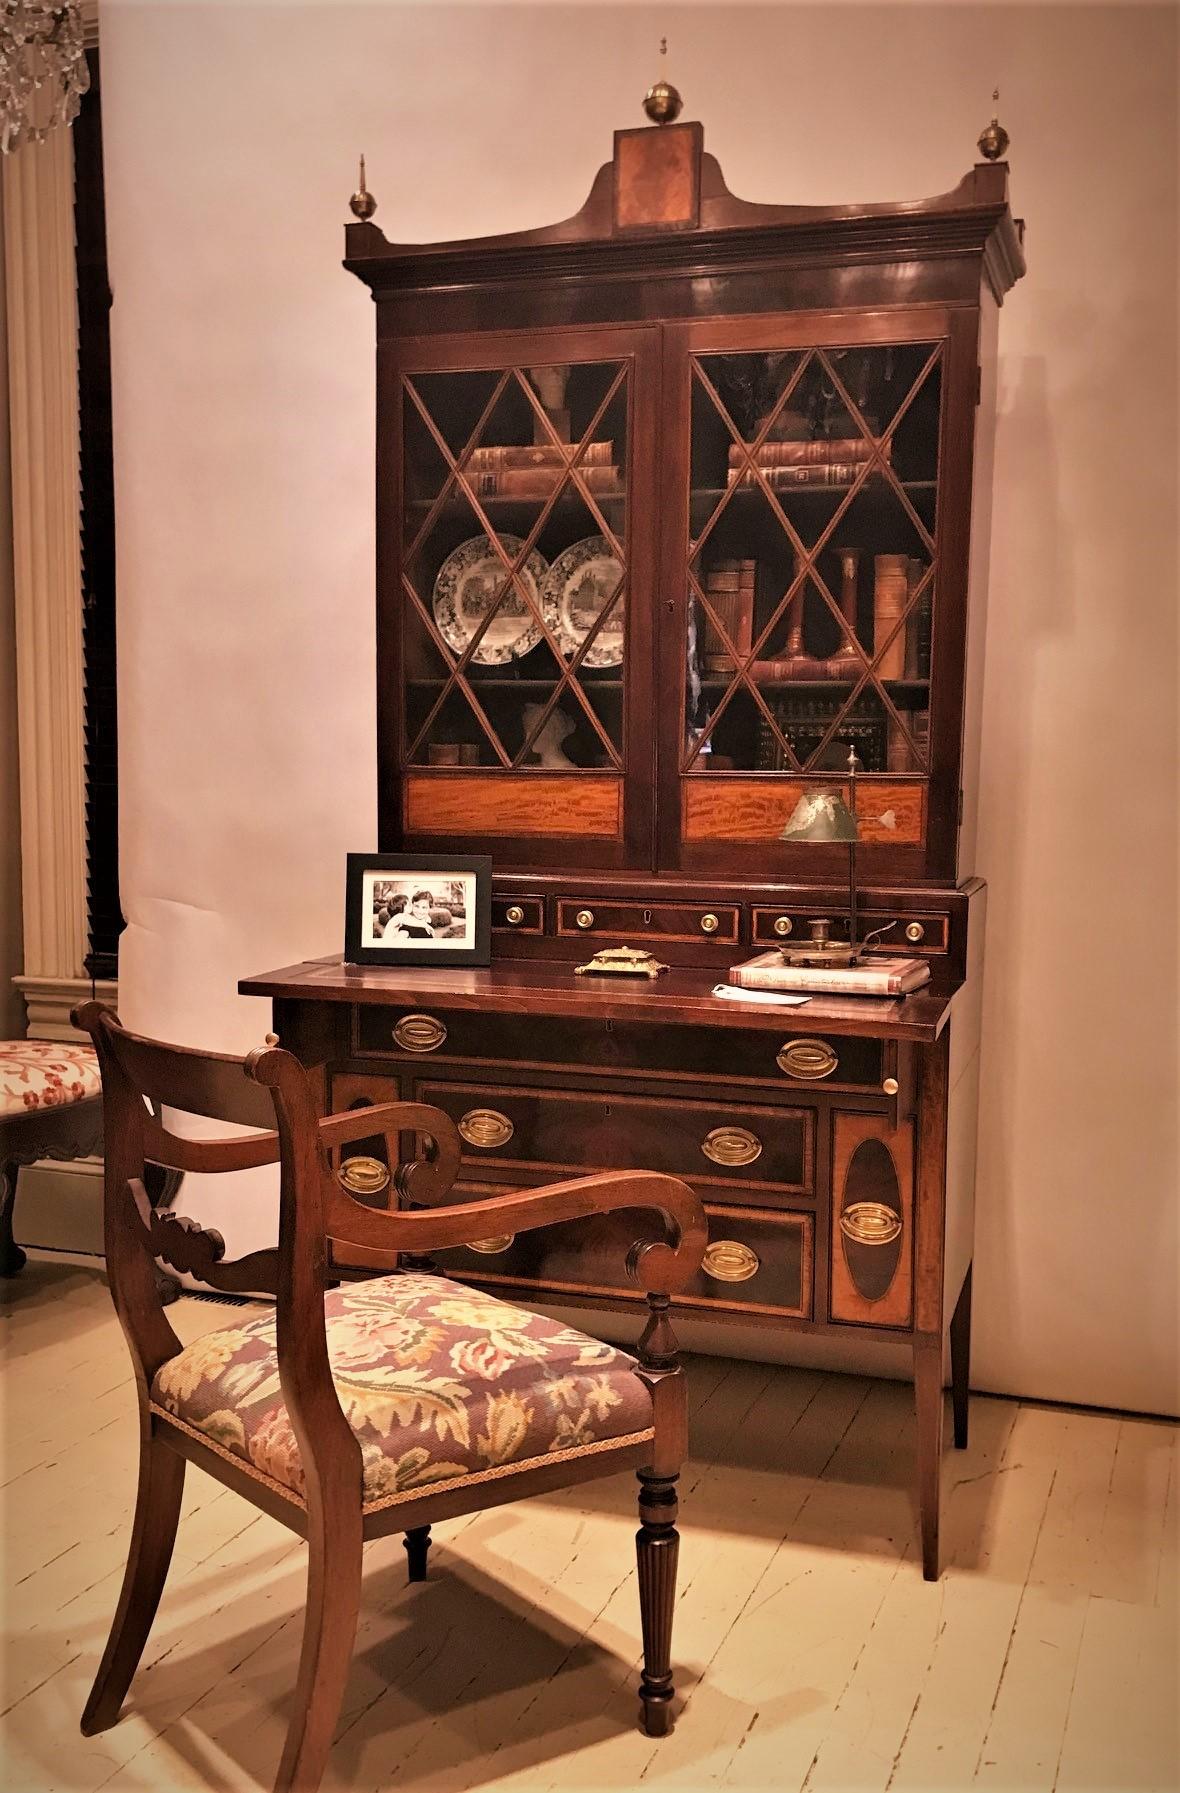 This beautiful and elegant piece was probably made around Boston in the early 20th Century. Its design was inspired by late 18th Century New England Hepplewhite styled secretary bookcases. It was handmade by a very skilled cabinetmaker using the